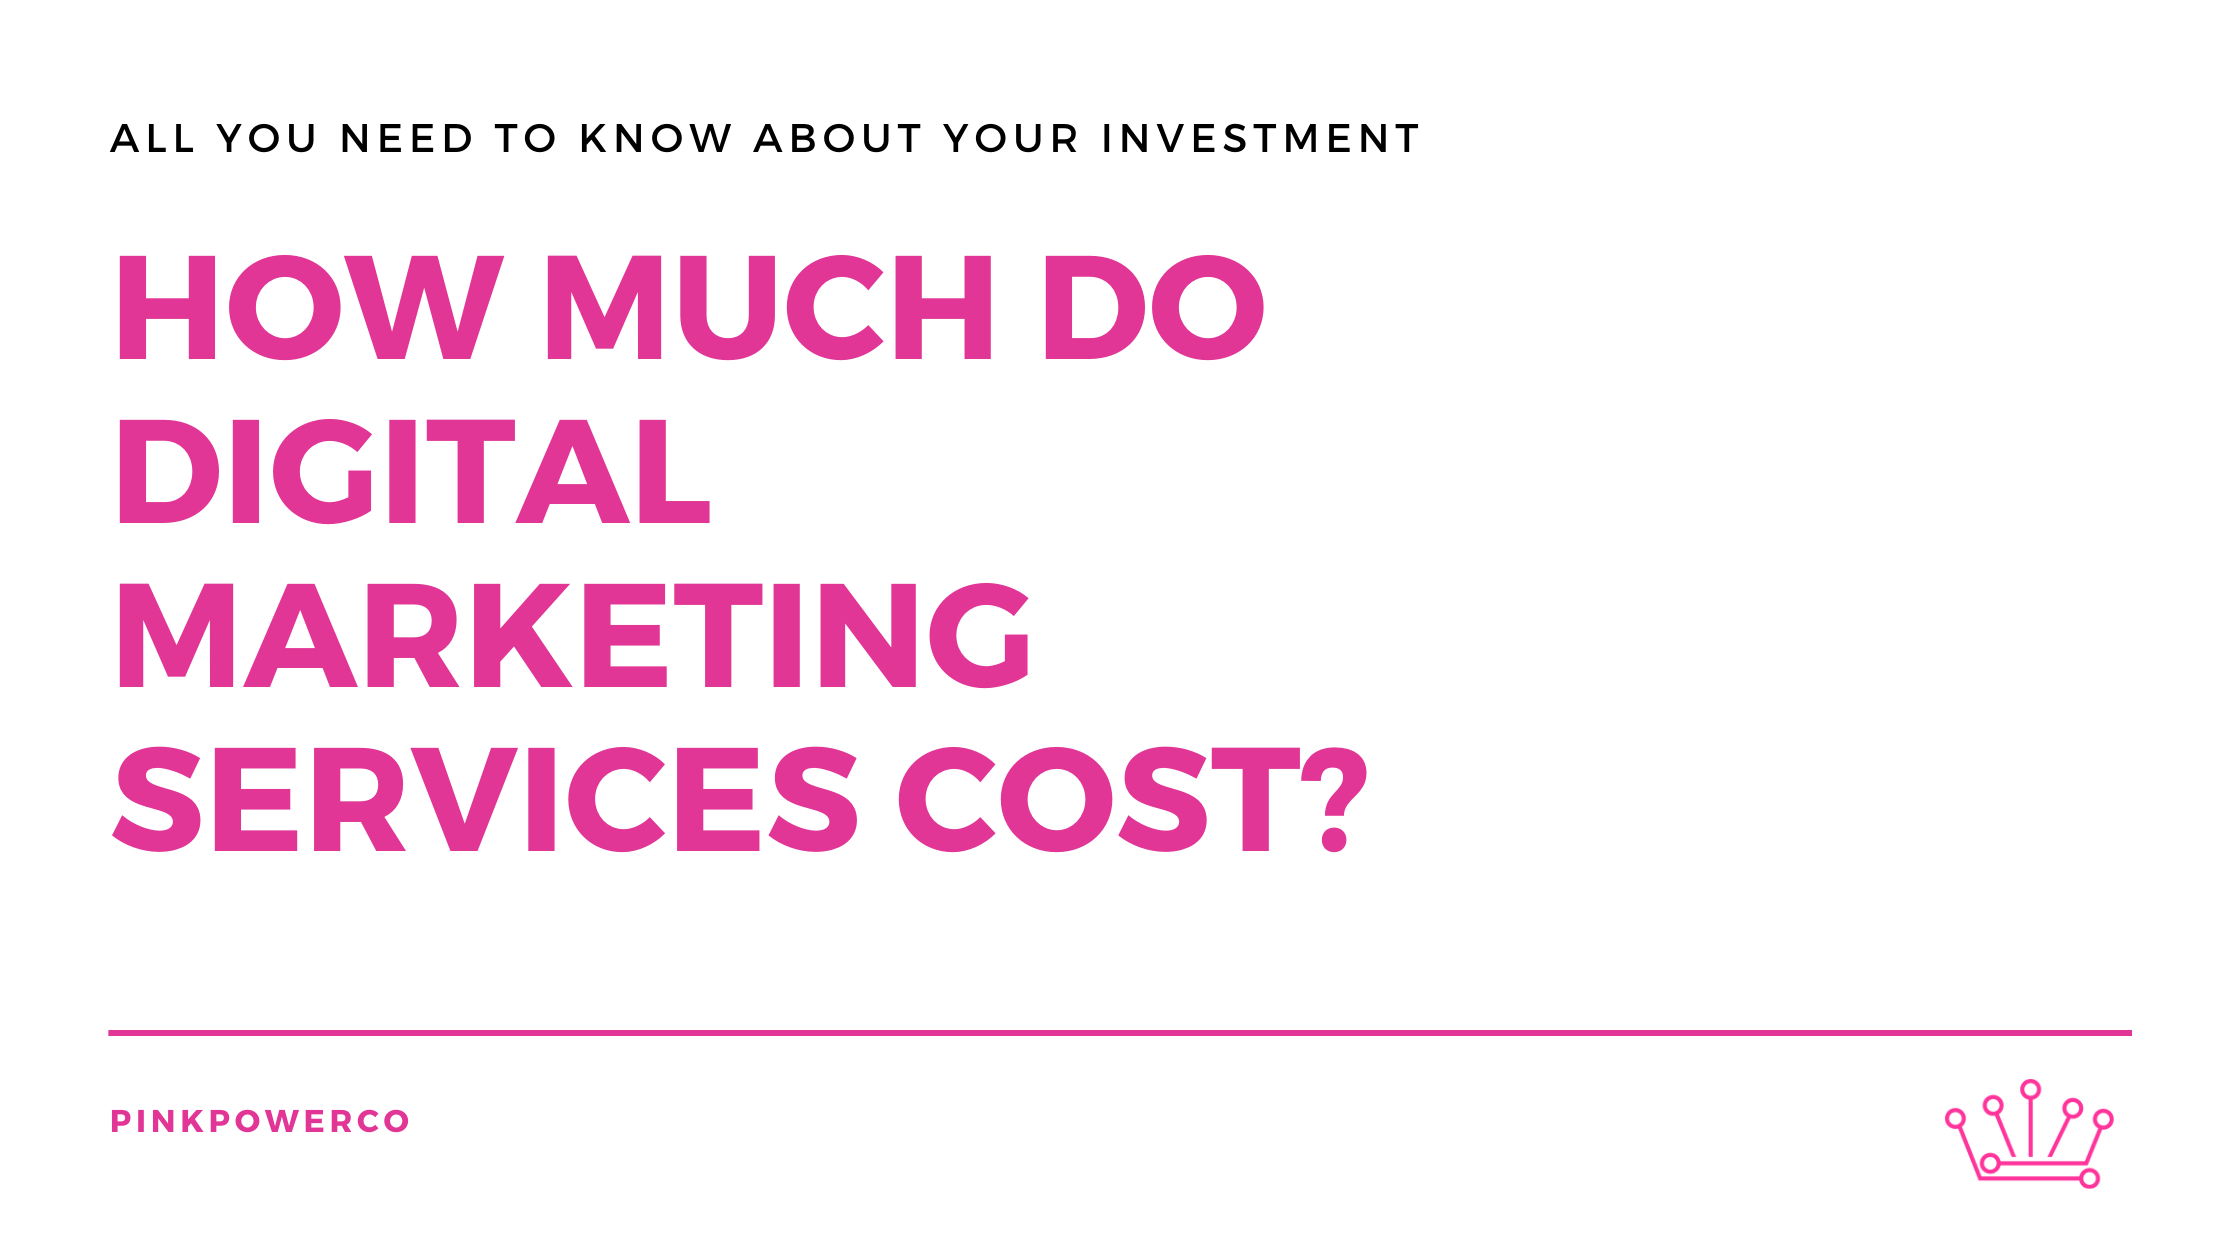 How much do digital marketing services cost?